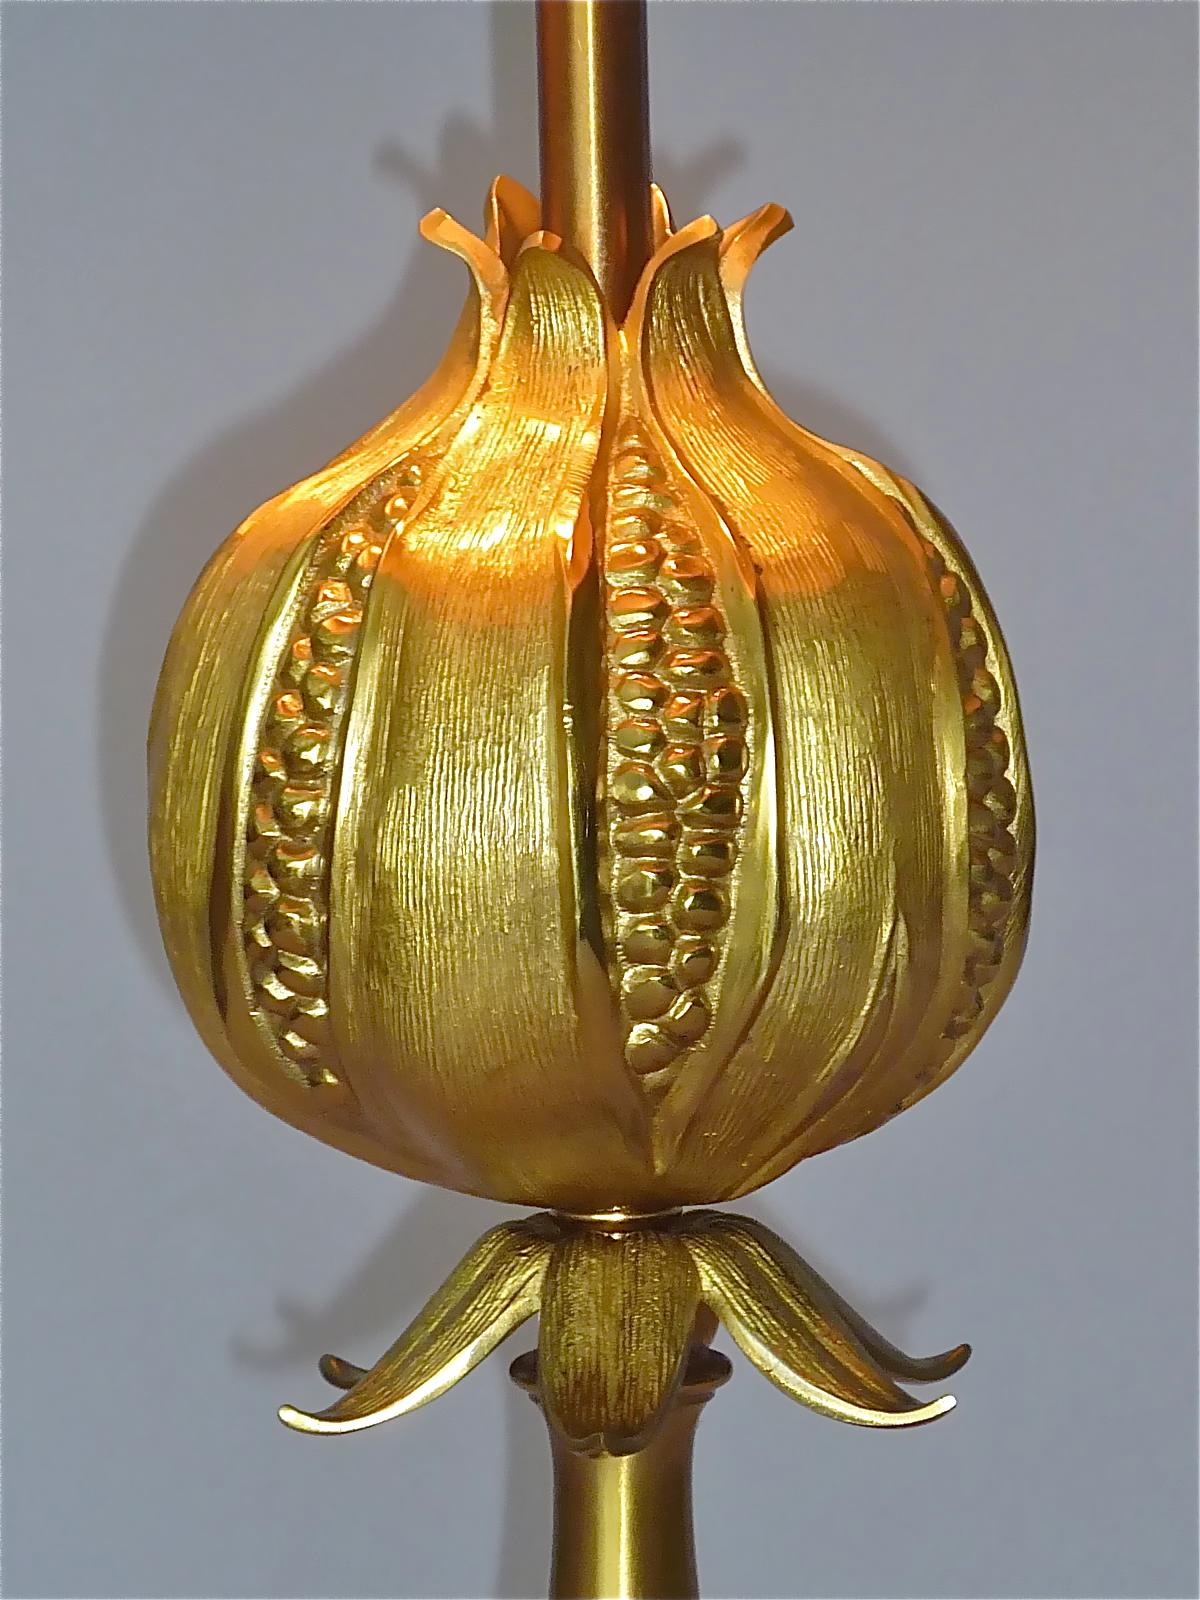 Rare Signed Gilt Bronze French Table Lamp Maison Charles Pomgranate 1970s Jansen For Sale 9